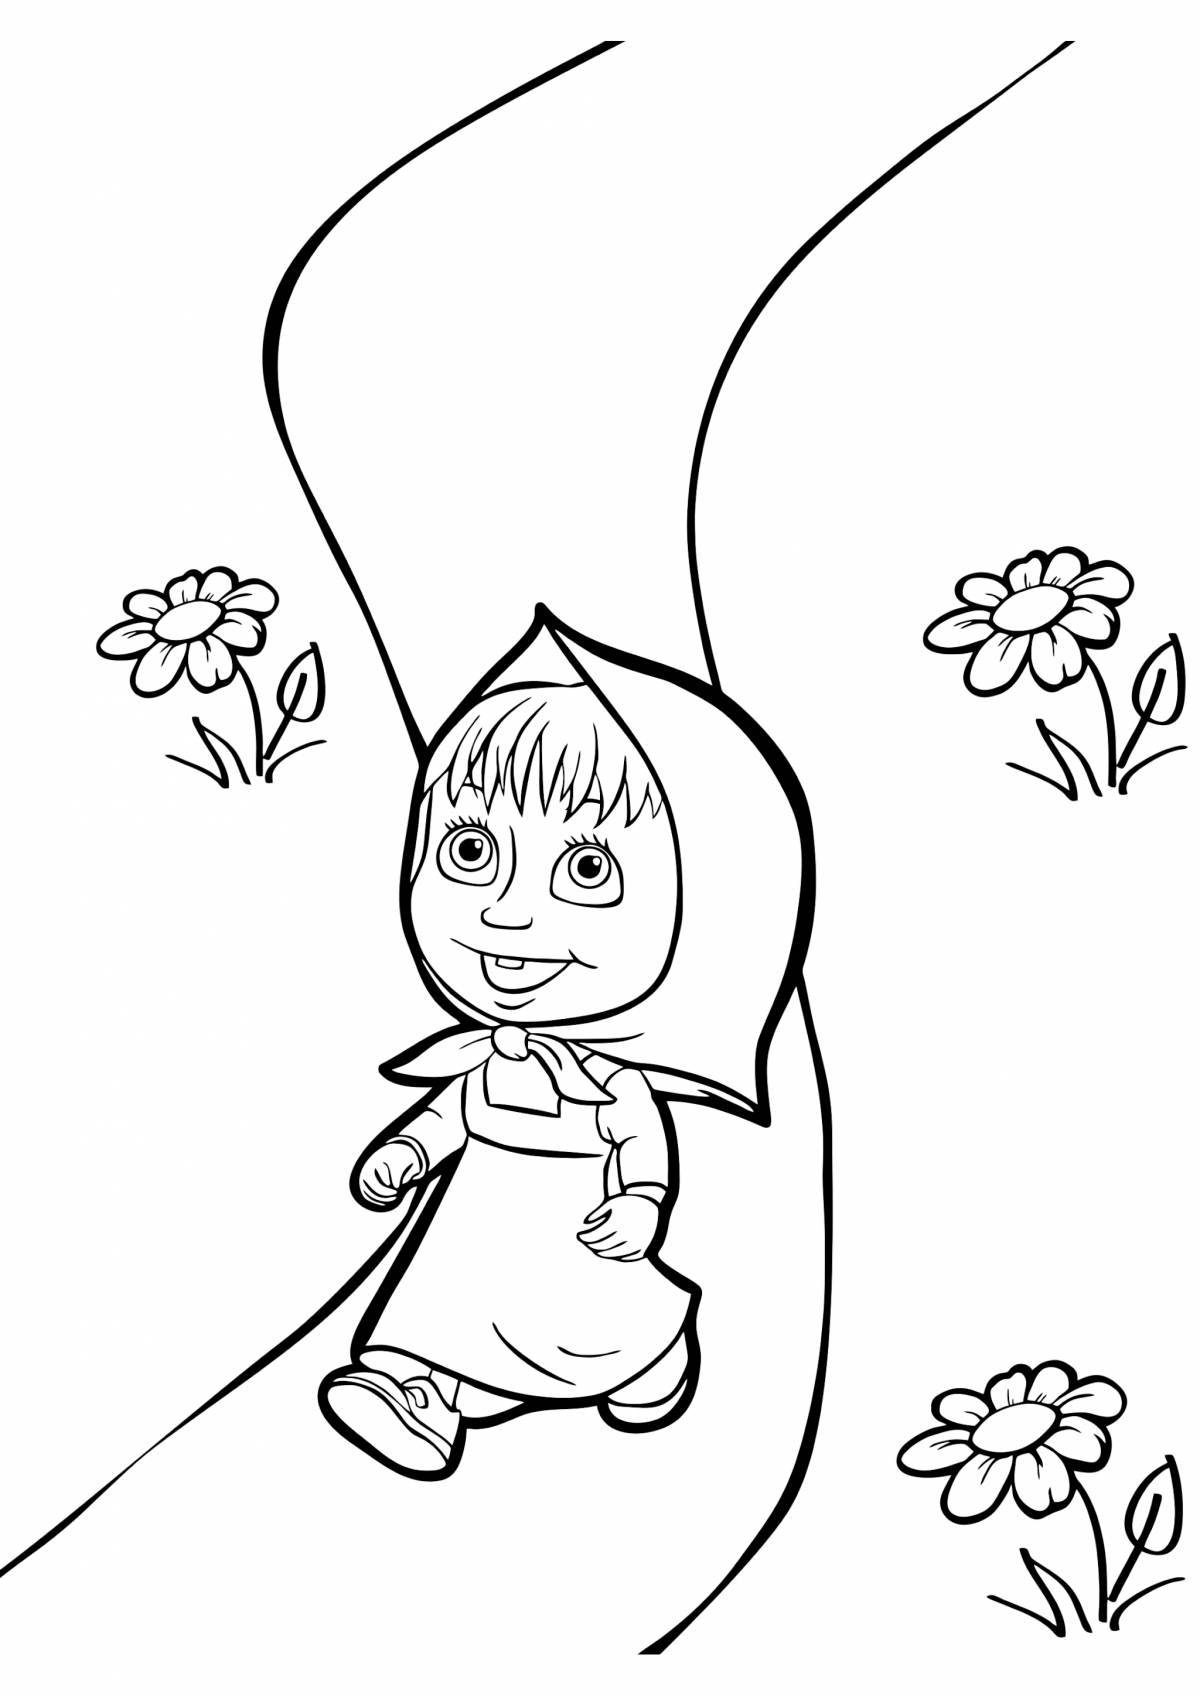 Bright Masha and the bear coloring pages for kids